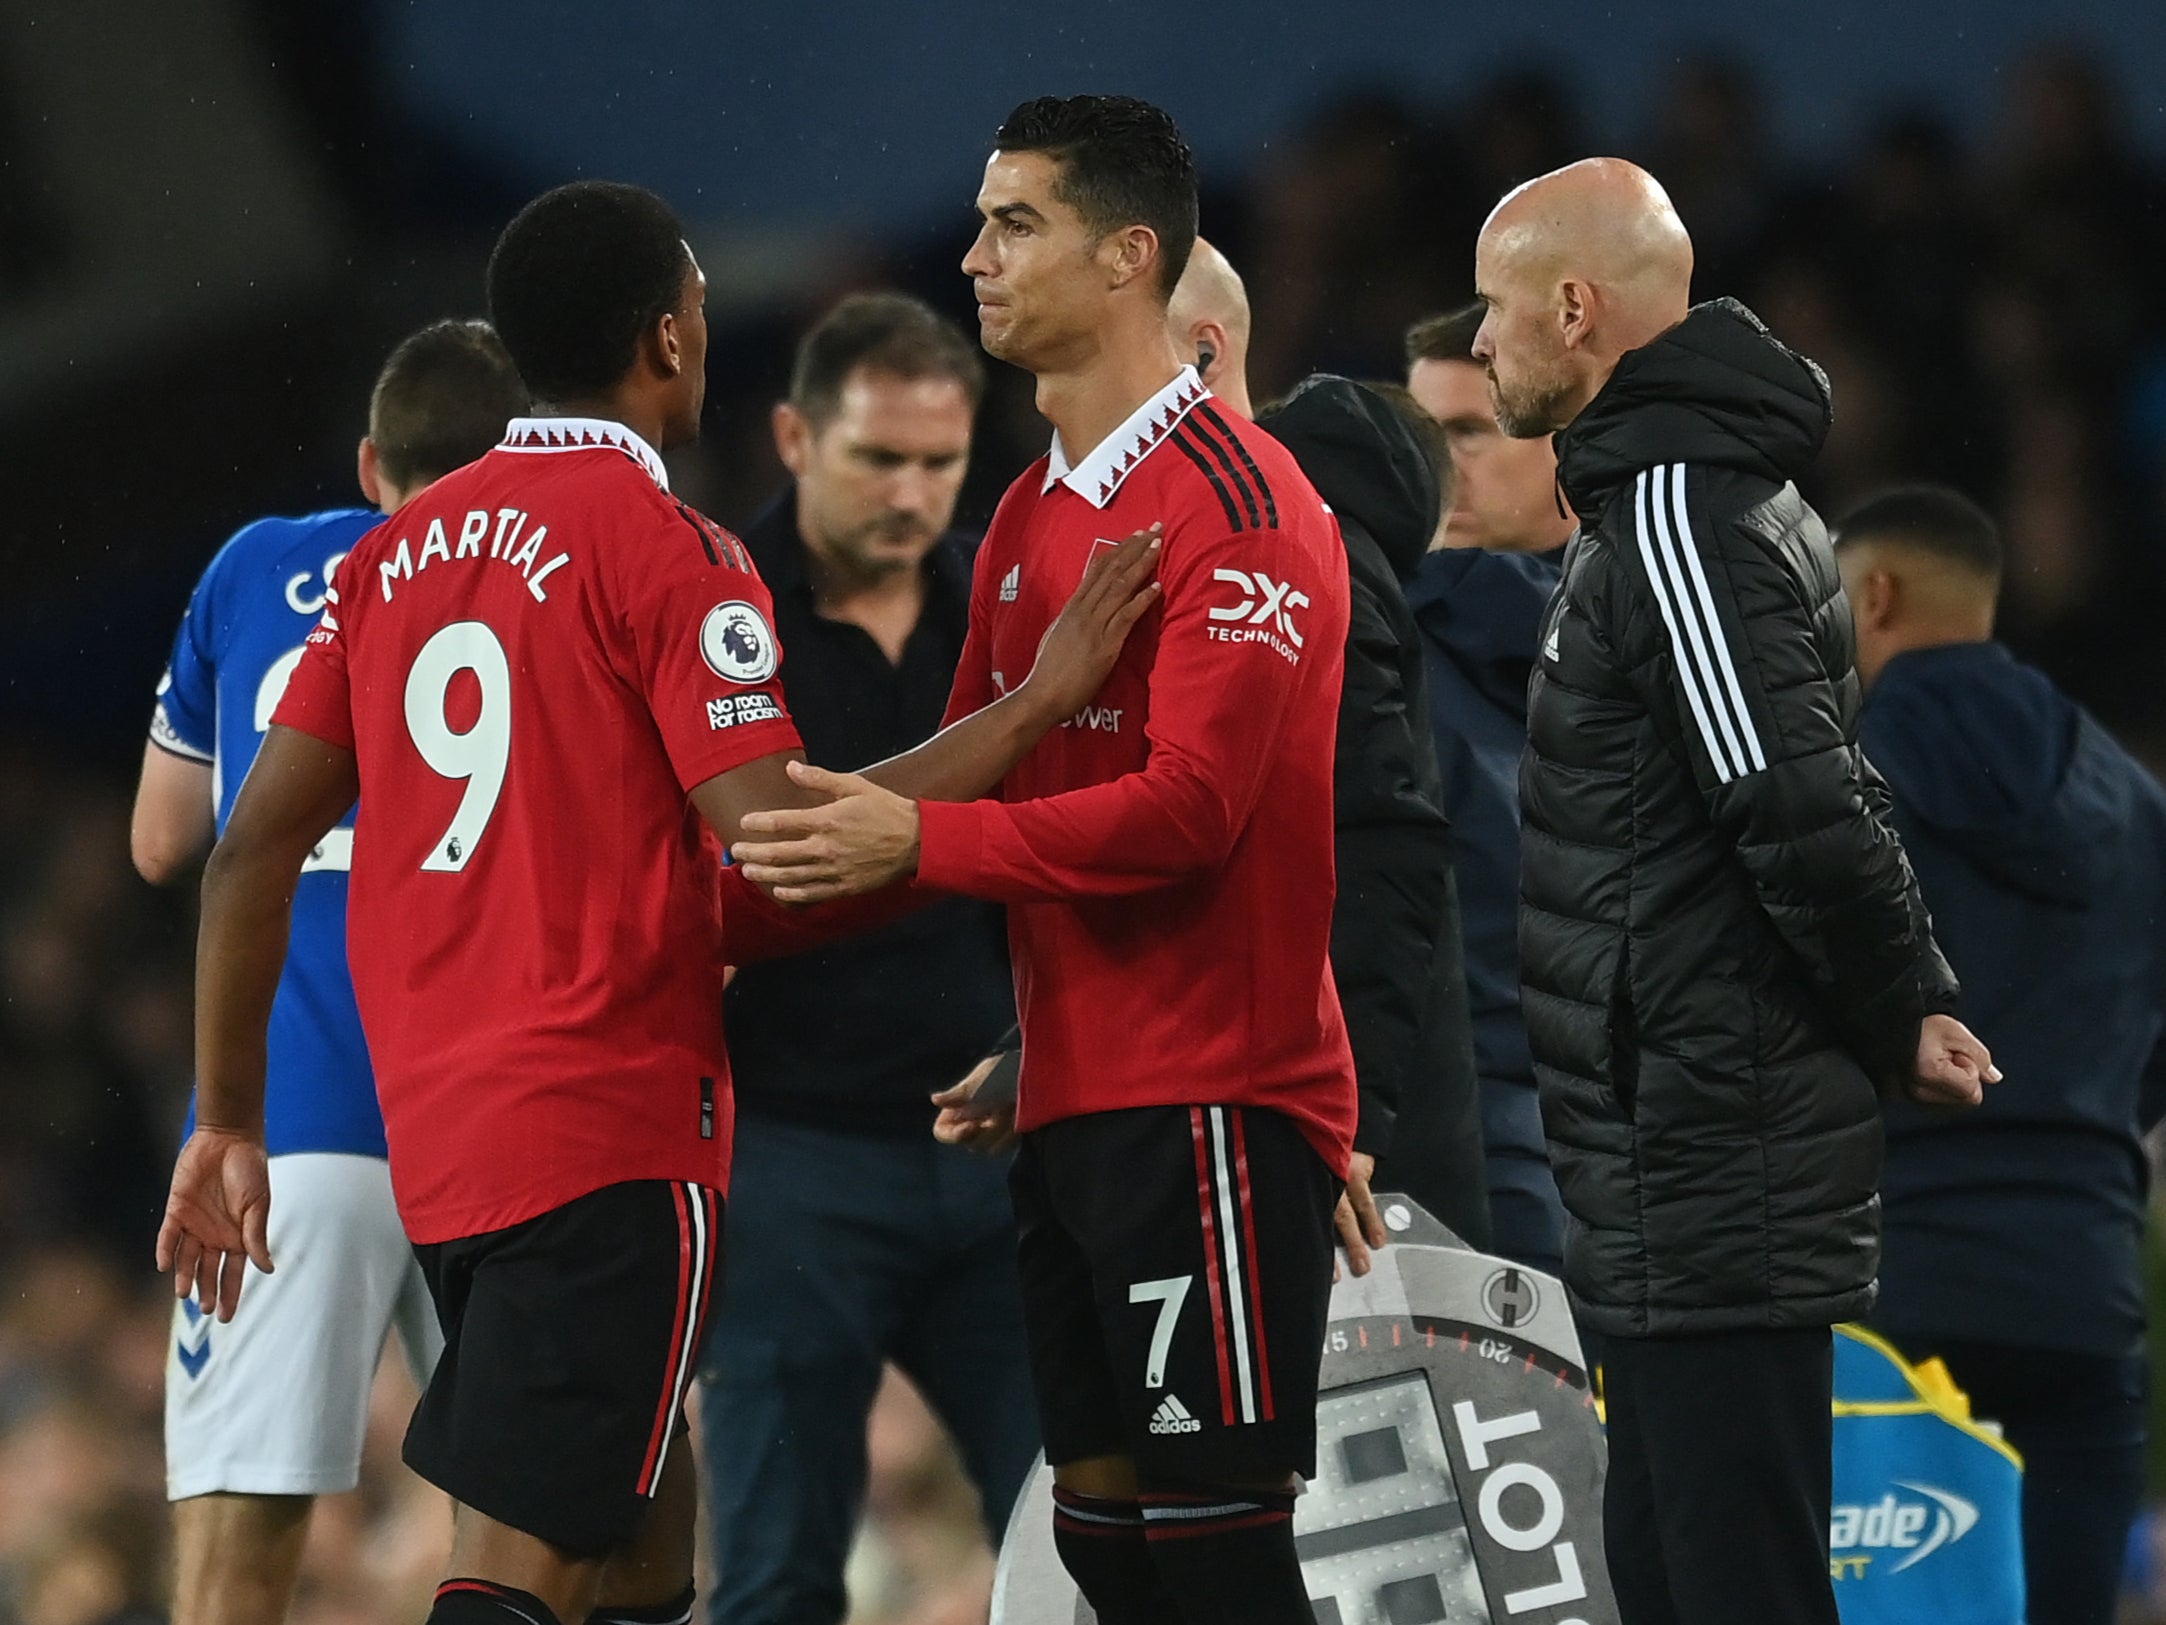 Manchester United forward Anthony Martial was replaced after half an hour at Goodison Park